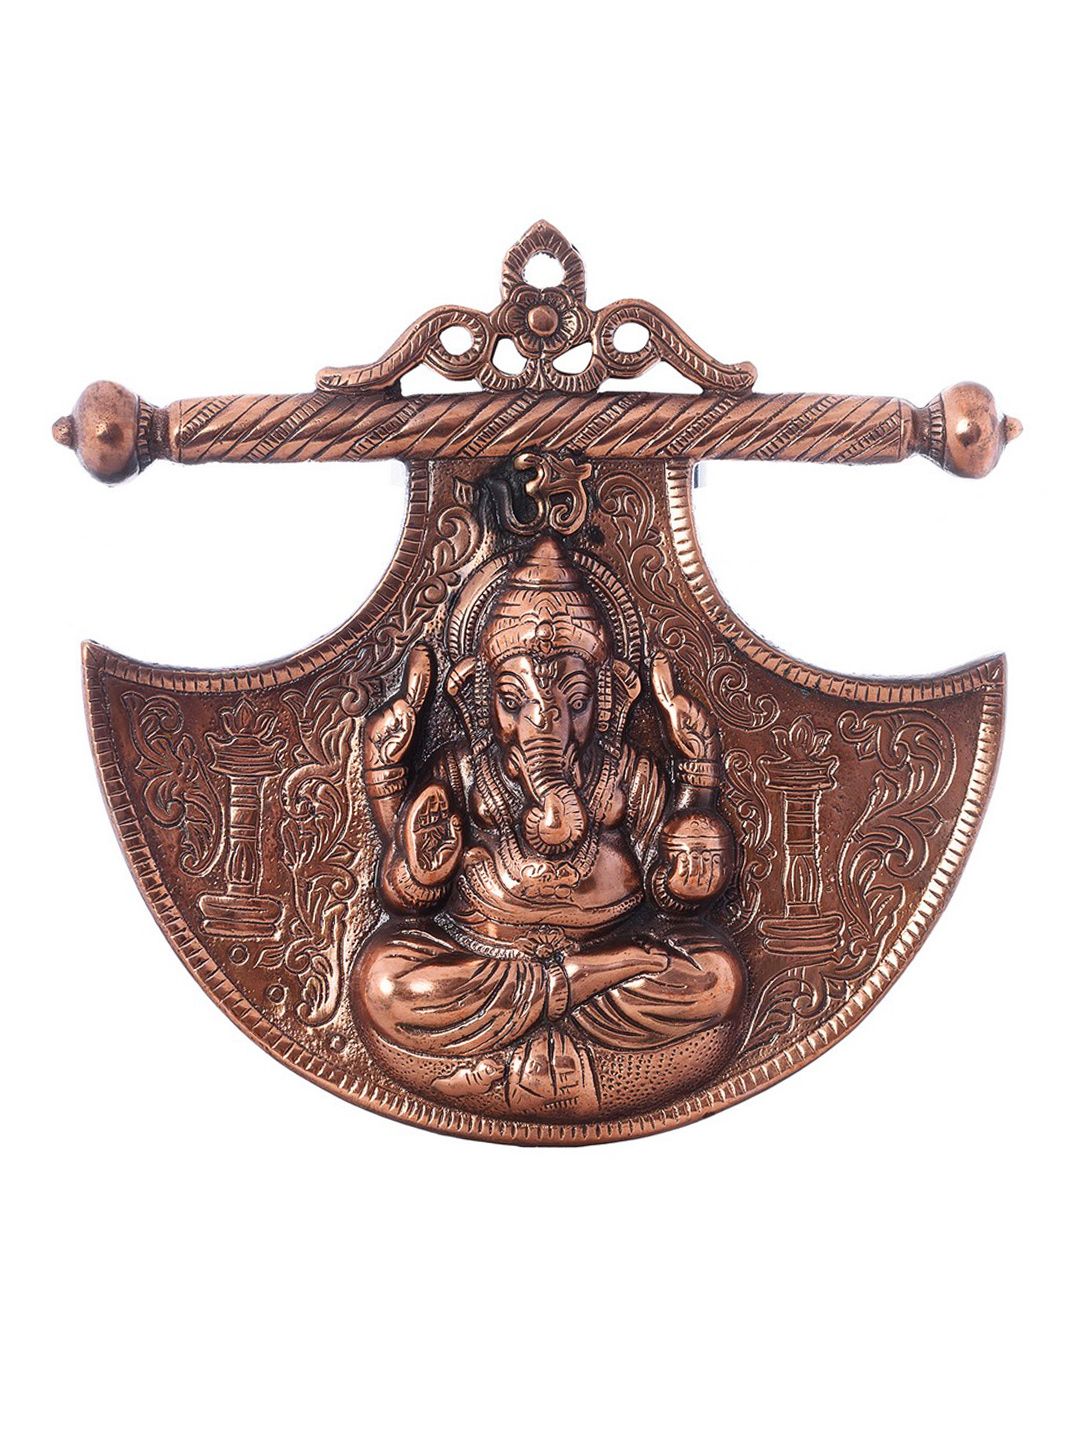 eCraftIndia Copper-Toned Metal Lord Ganesh Idol Wall Hanging Price in India